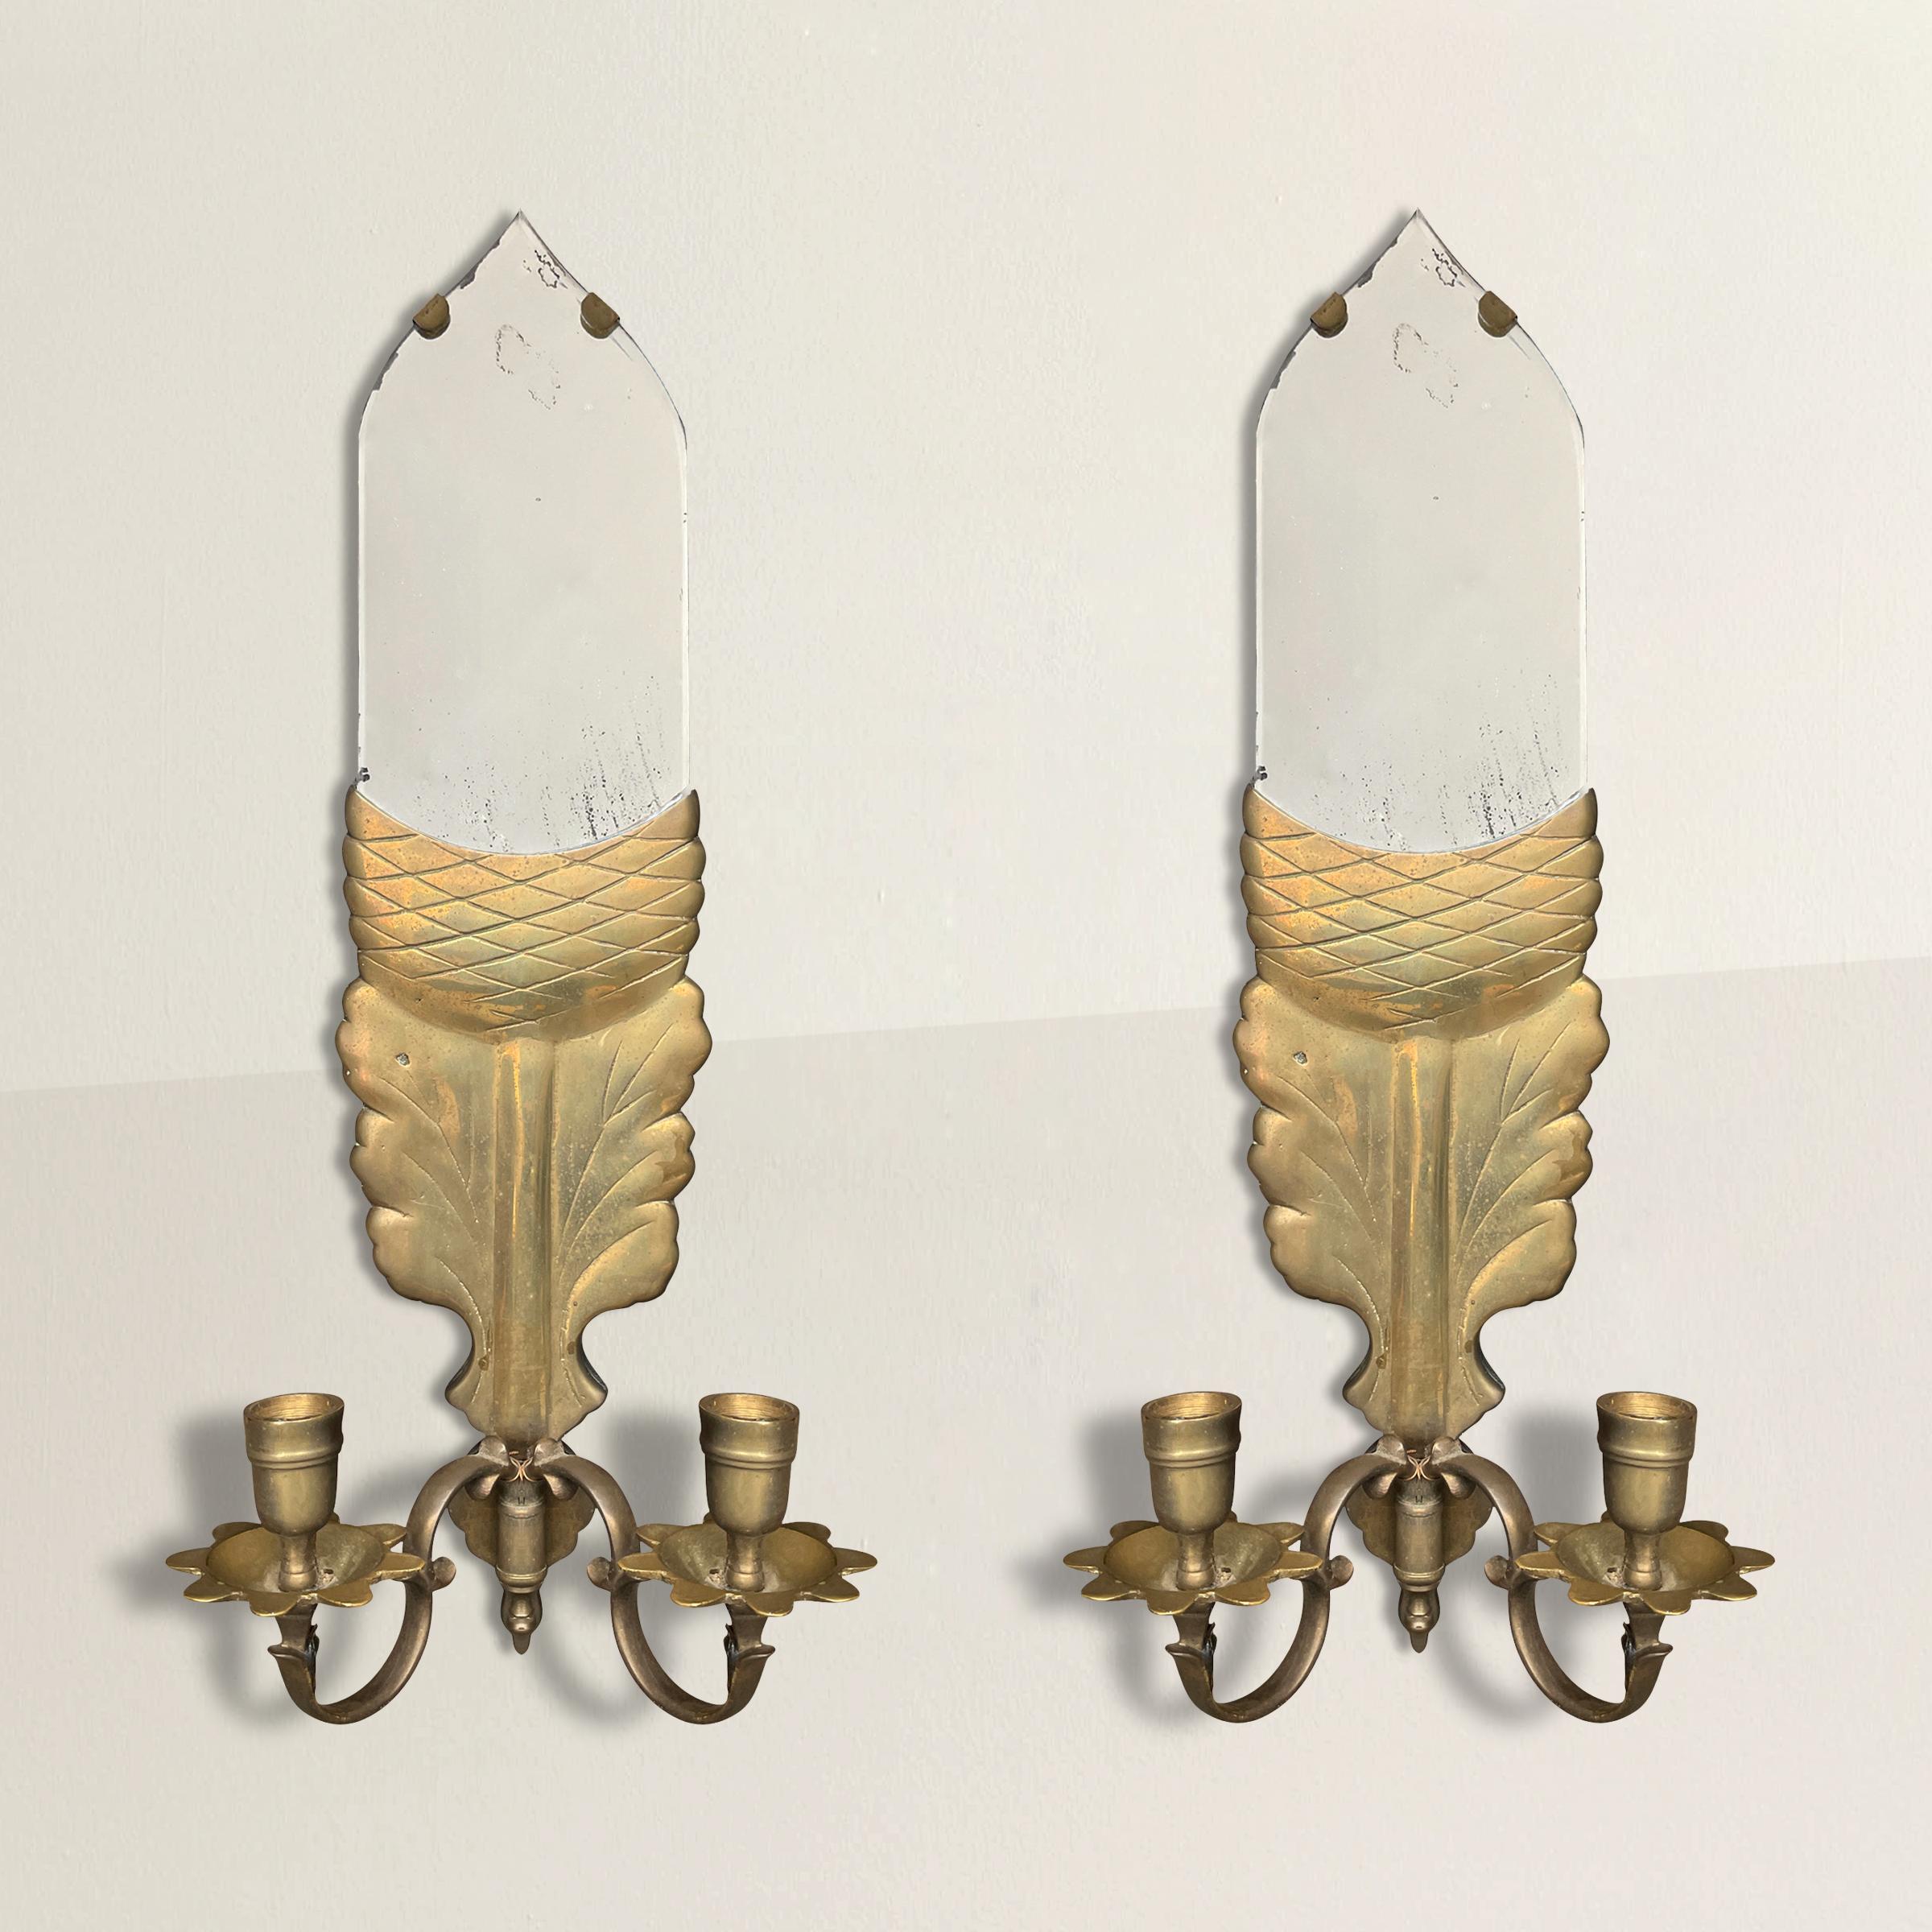 A wonderfully charming pair of 20th century candle sconces with mirrored acorns, oak leaf backplates, and scrolled arms. Sconces were once wired, but are no longer. Can be used with candles, or electrified once again.